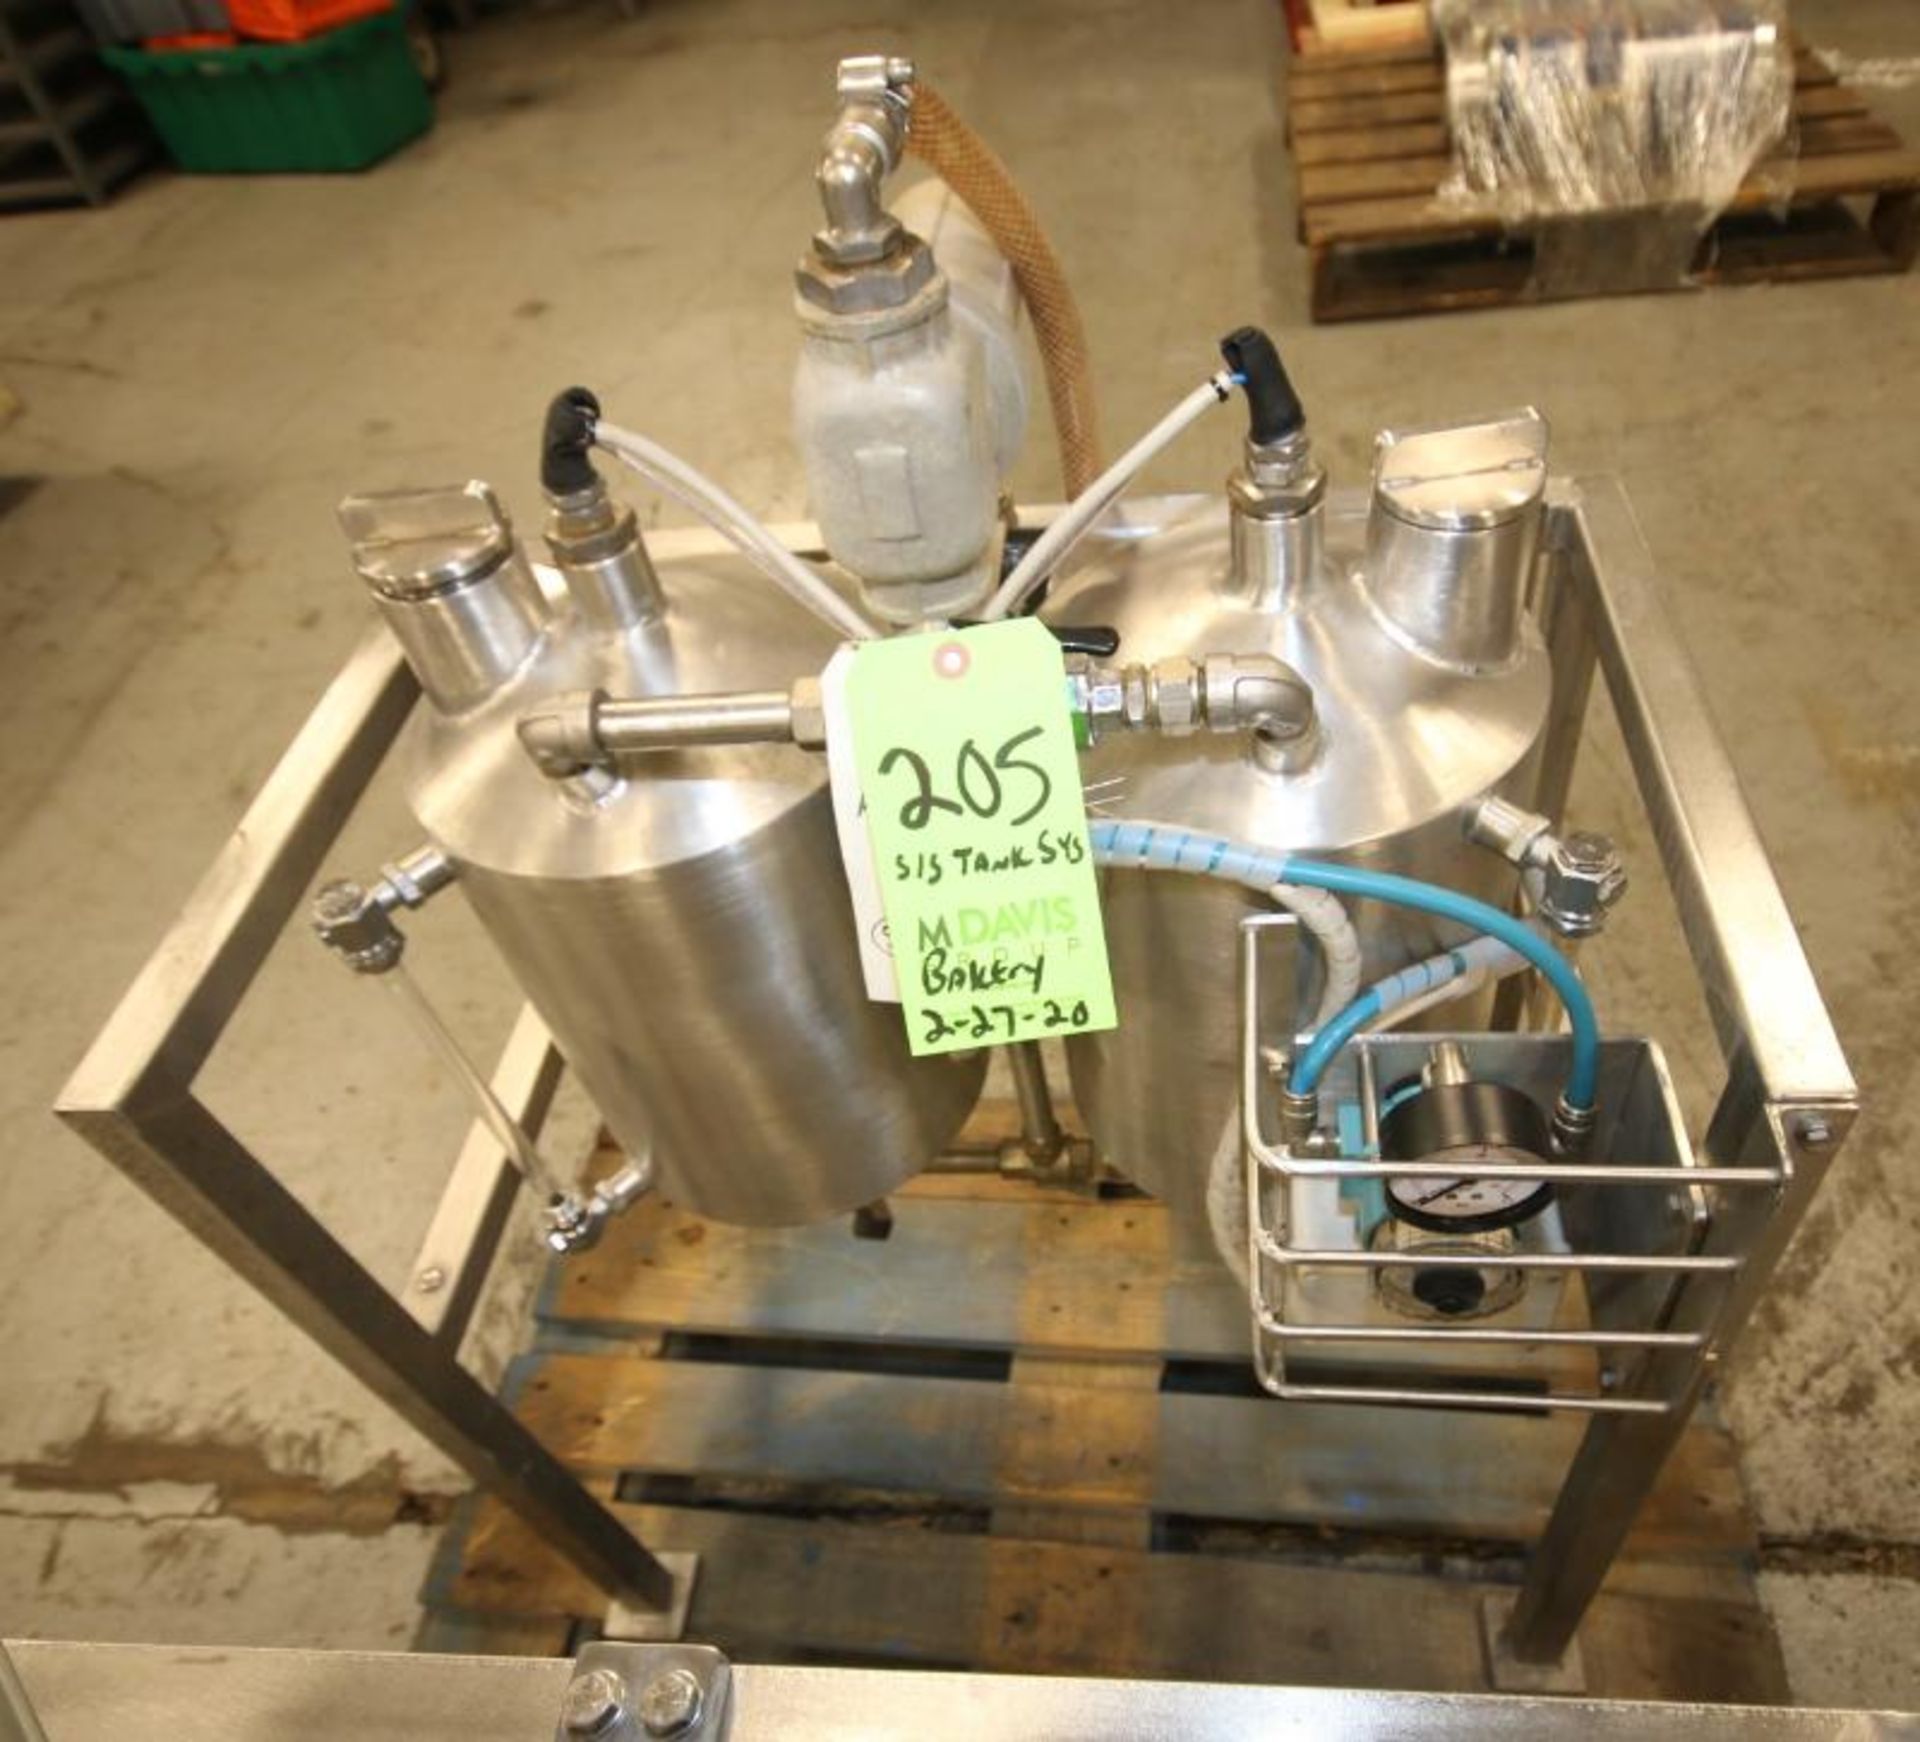 Portable S/S 2 - Tank Sprayer System with 12" H x 9" W Tanks with Regulator & Filter, Mounted on